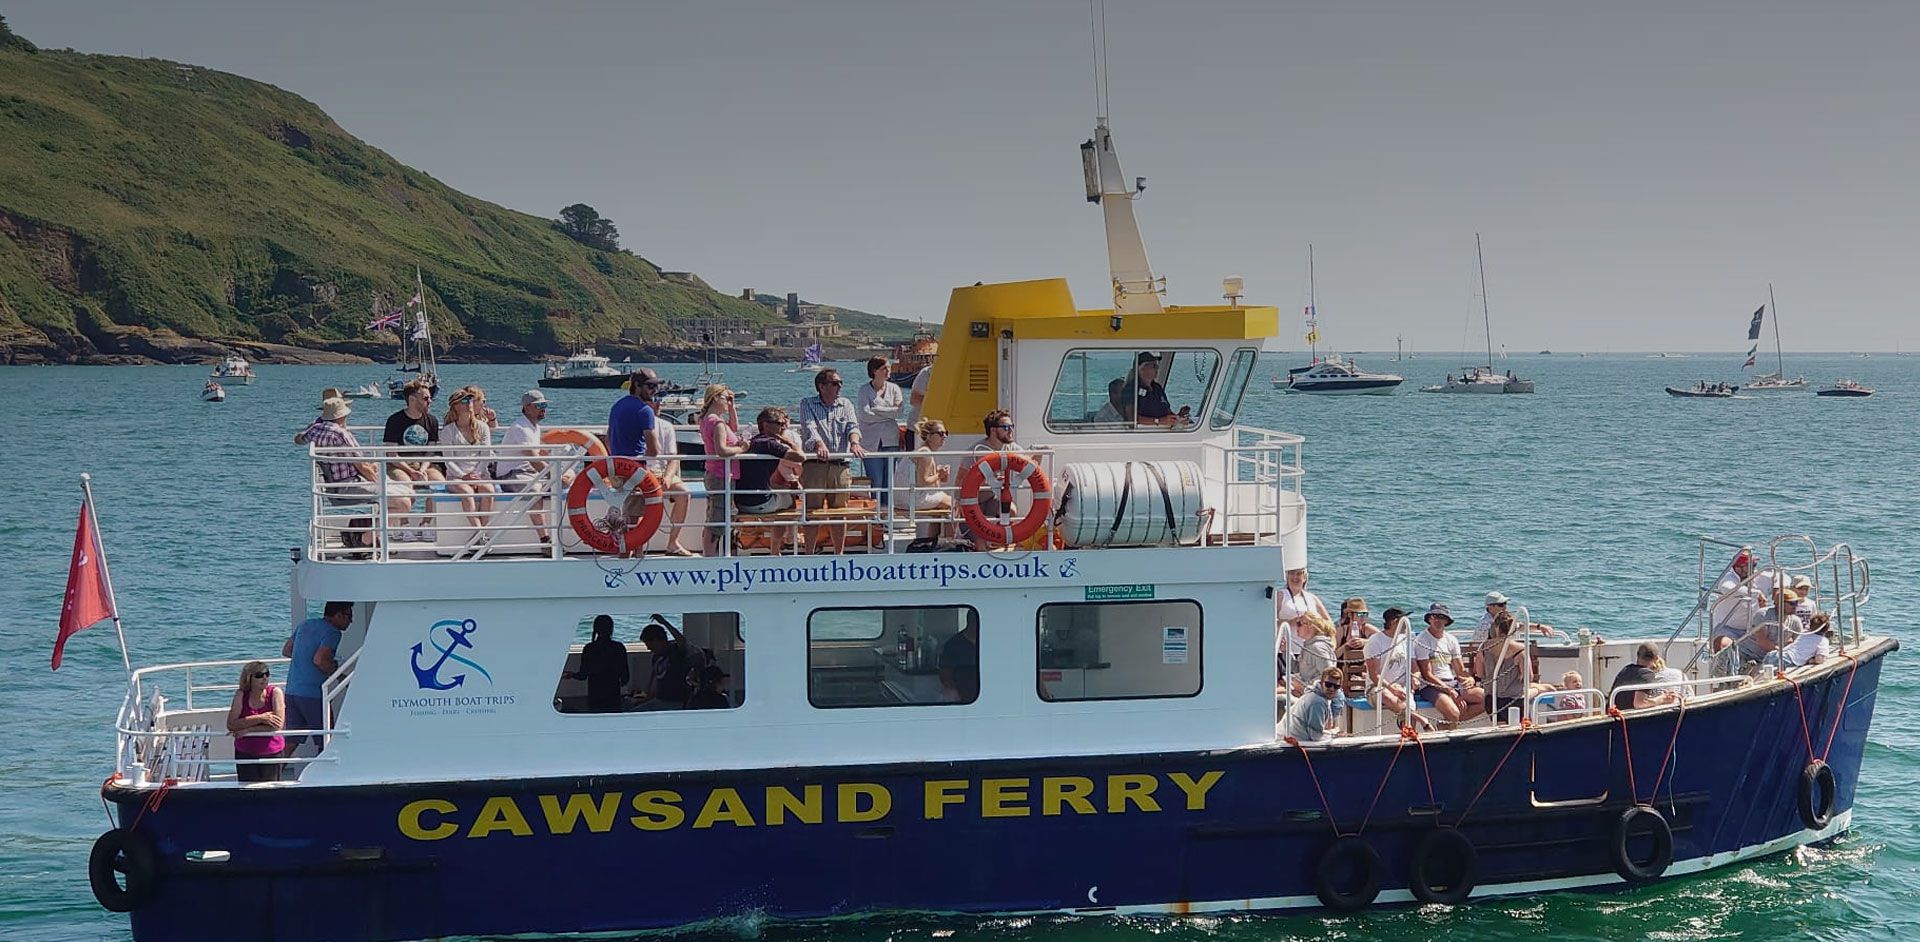 Plymouth Boat Trips Cawsand Ferry - Slide Four